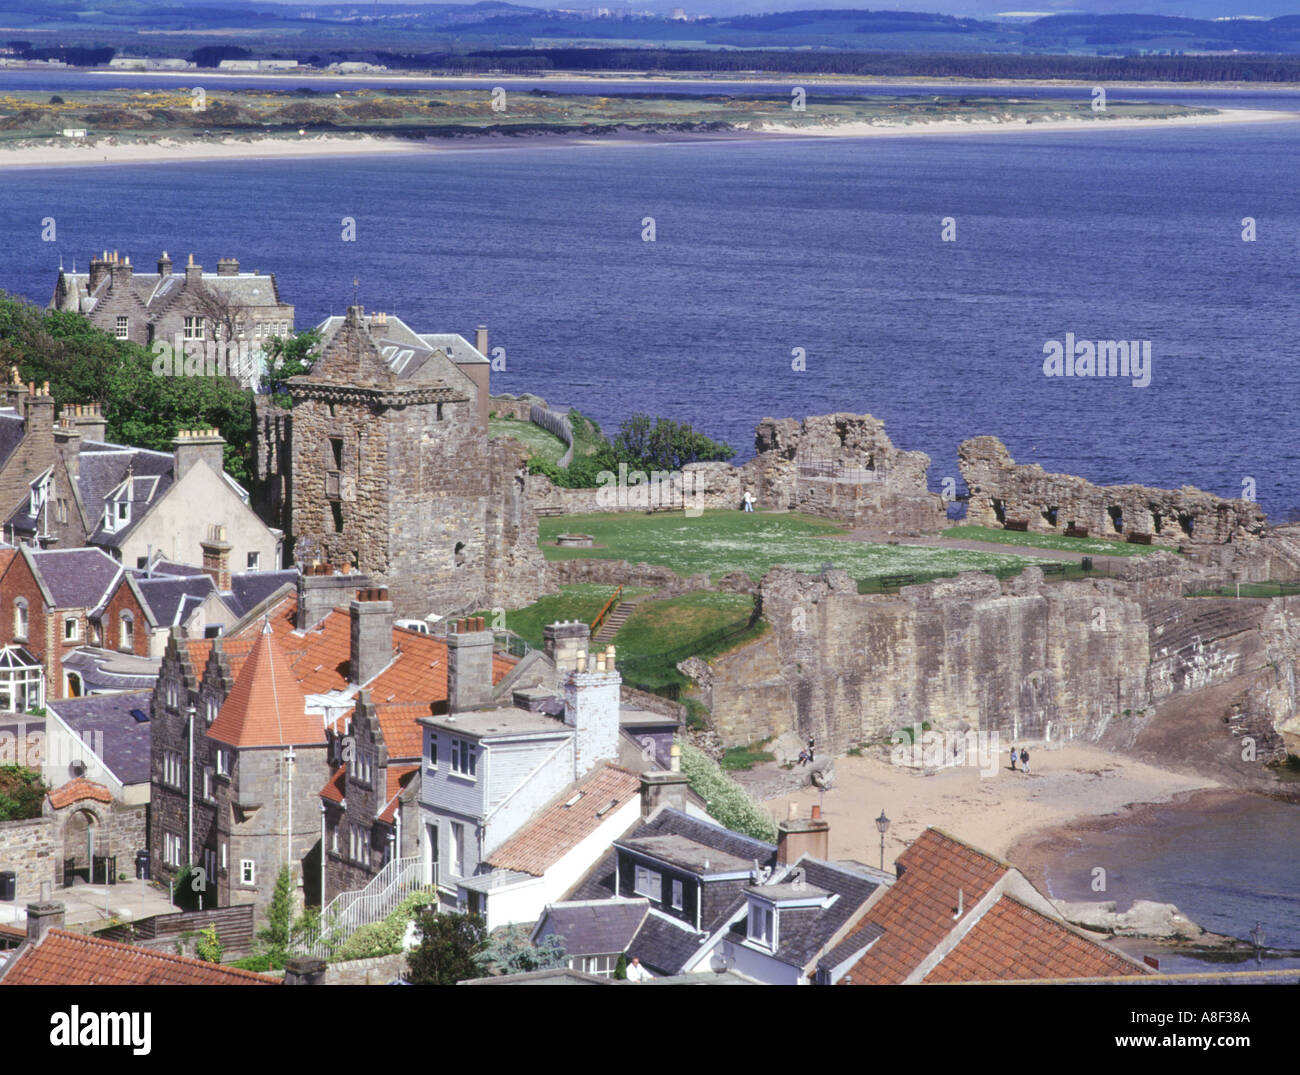 dh Town Fifeshire coastal towns ST ANDREWS FIFE Scottish castles Houses and West Sands beach north sea uk scotland castle coast Stock Photo